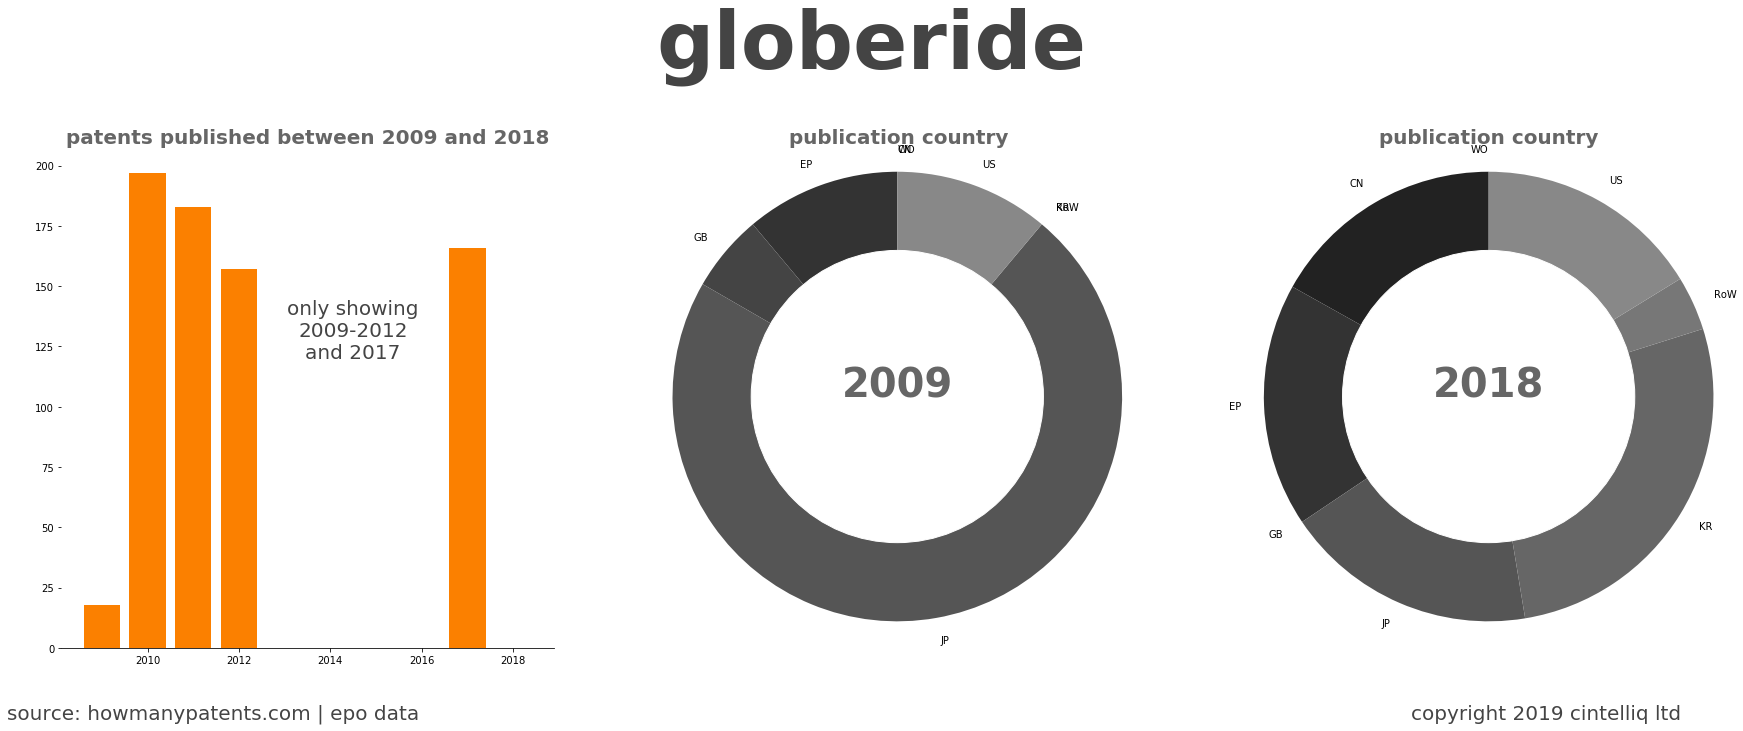 summary of patents for Globeride